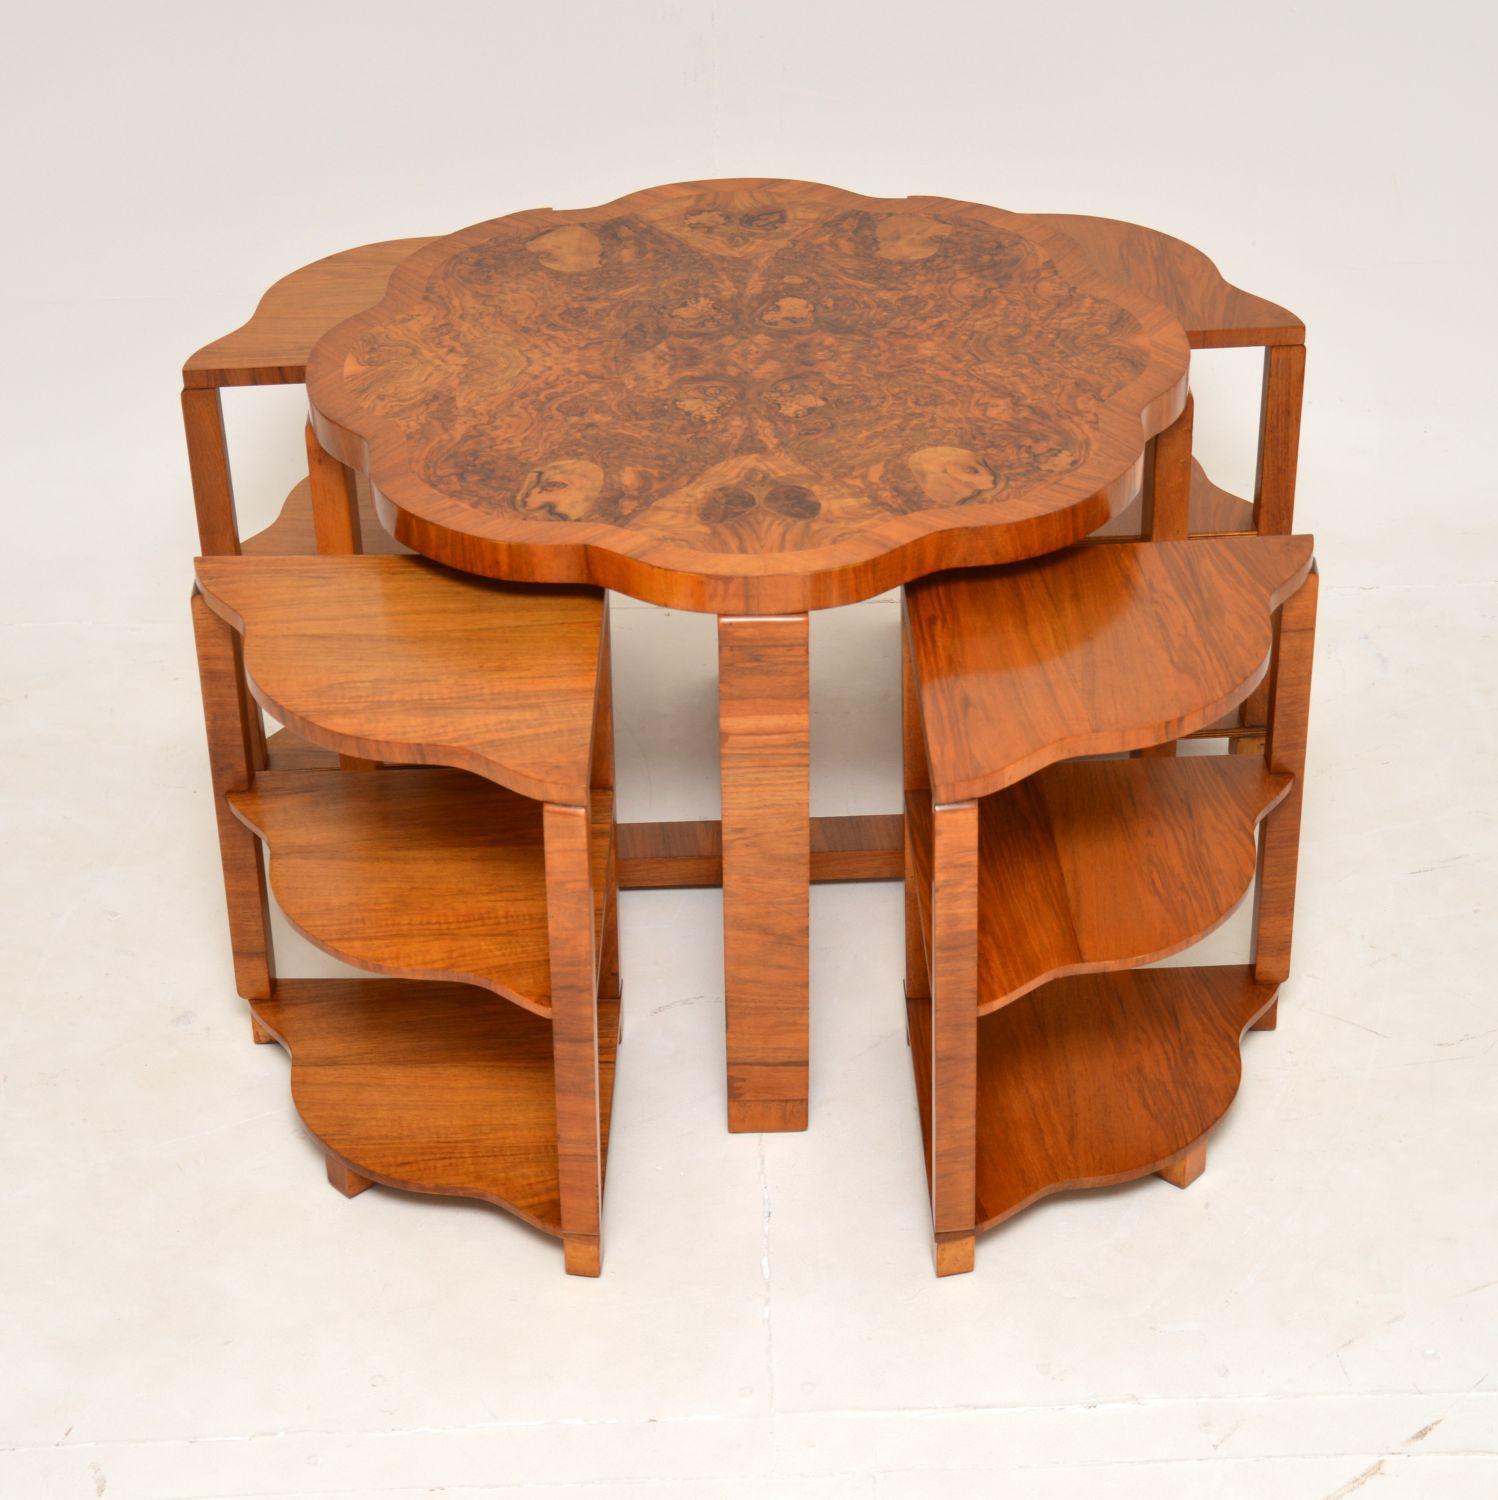 A fantastic art deco period nesting coffee table in walnut. This was made in England by Harry & Lou Epstein, it dates from the 1930’s.

This is of superb quality, with a beautiful flower shaped top and thick edges. It has a very useful design,